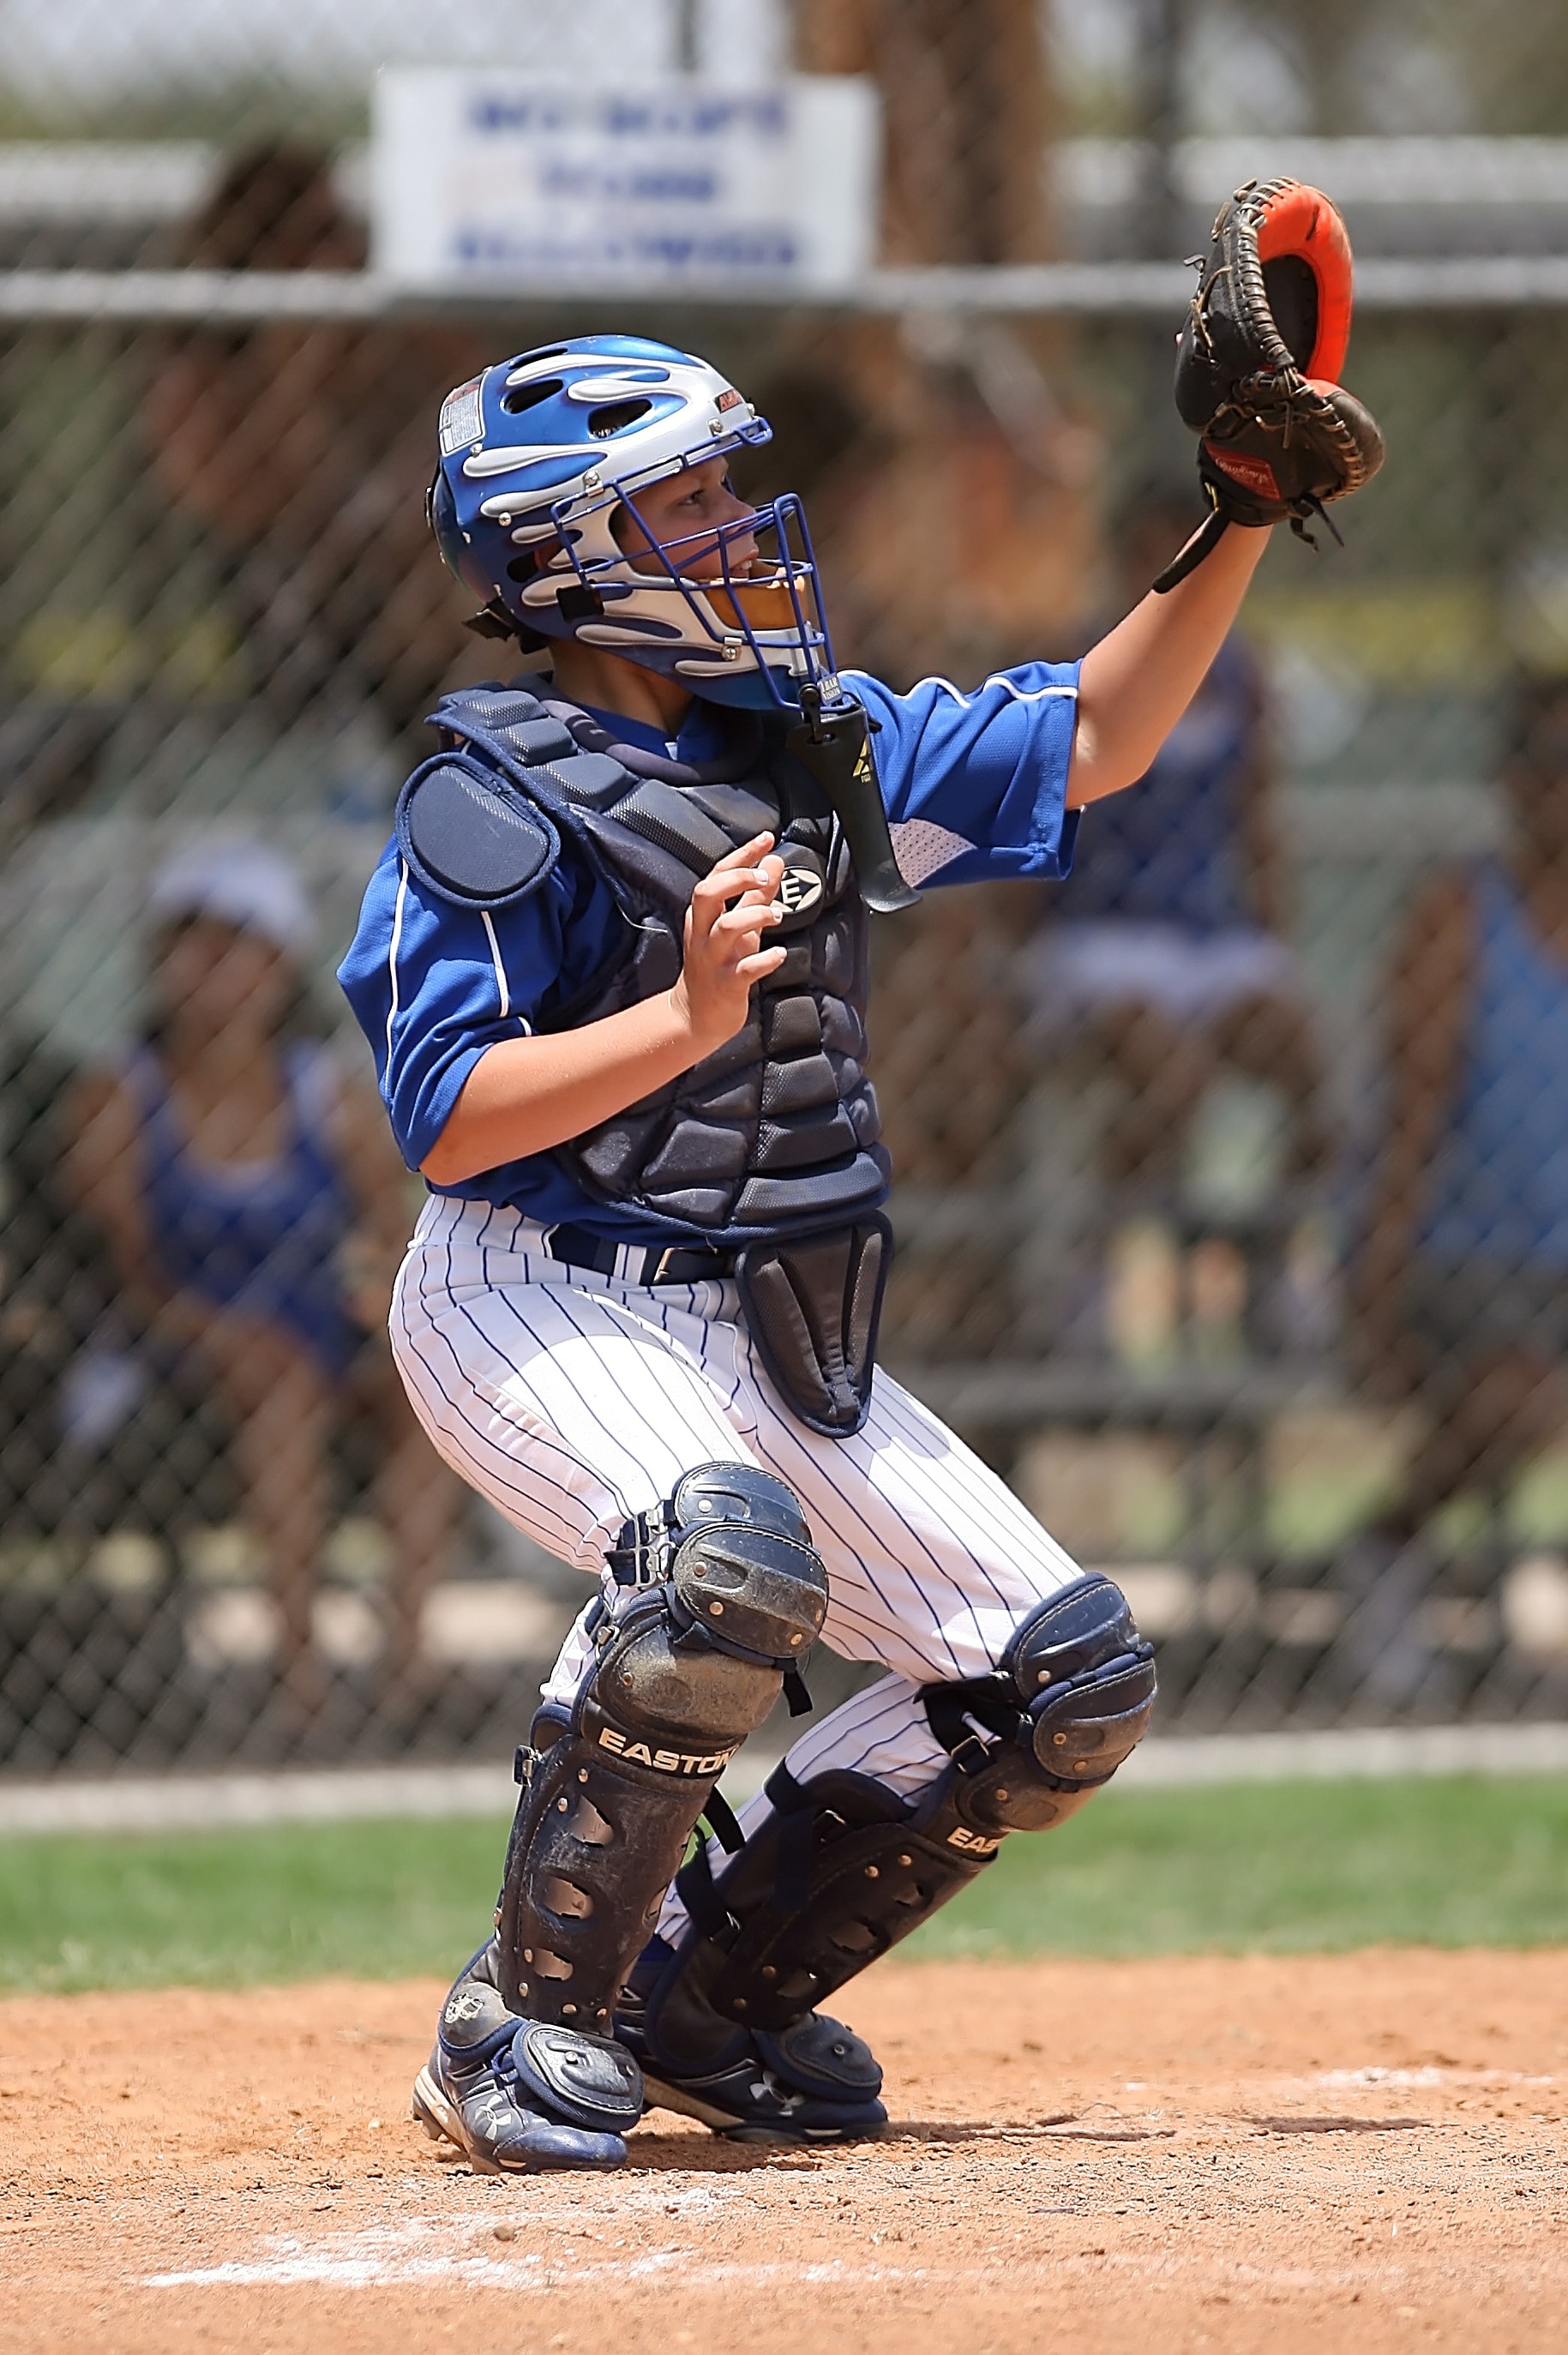 Picture Of A Baseball Catcher Background Images HD Pictures and Wallpaper  For Free Download  Pngtree